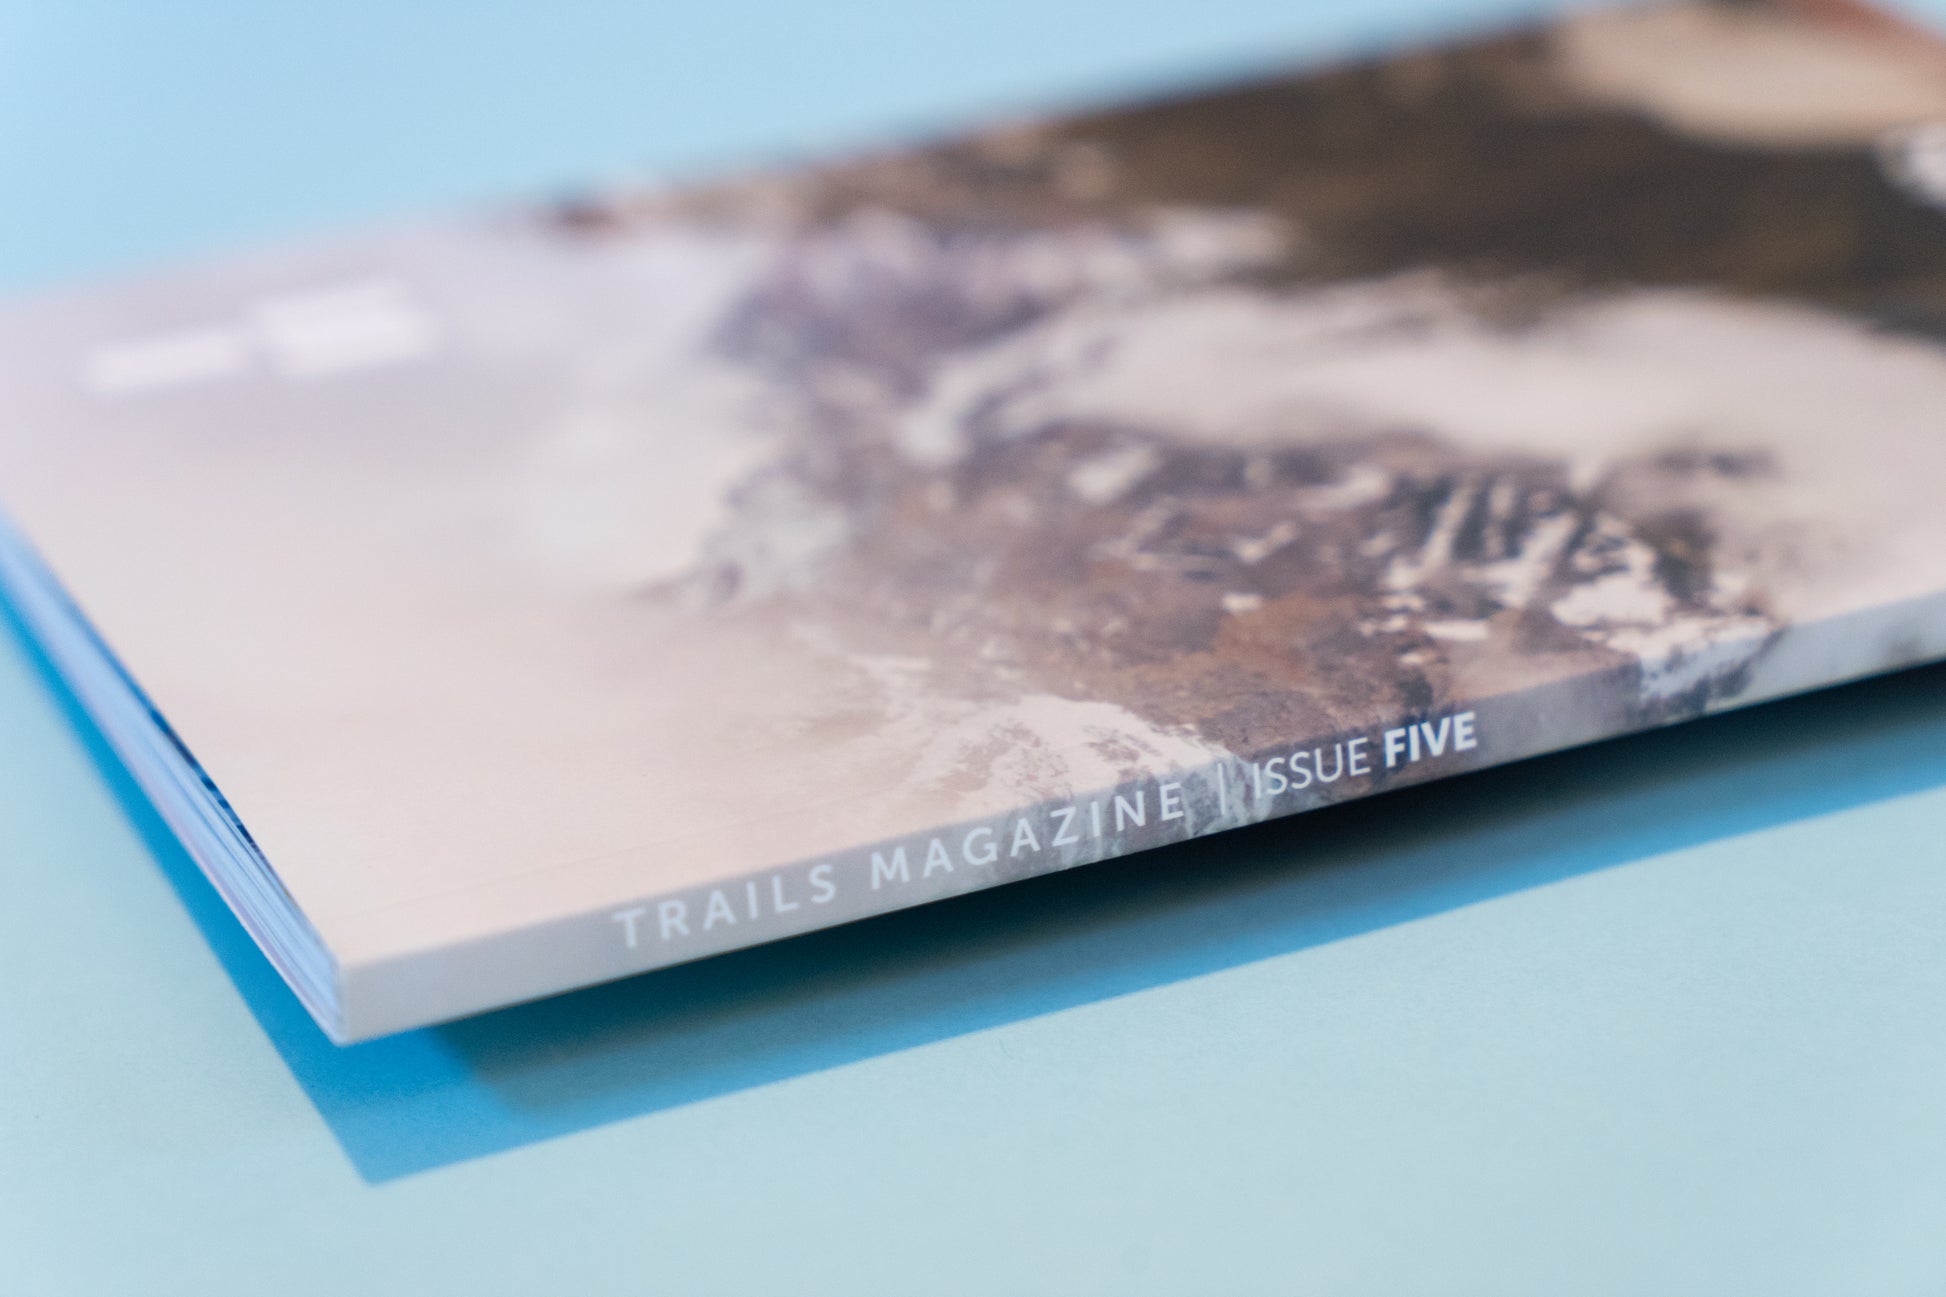 The binding of a magazine, displaying a mountain scene lays across a light blue backdrop. The text along the binding reads, "Trails Magazine Issue 5"